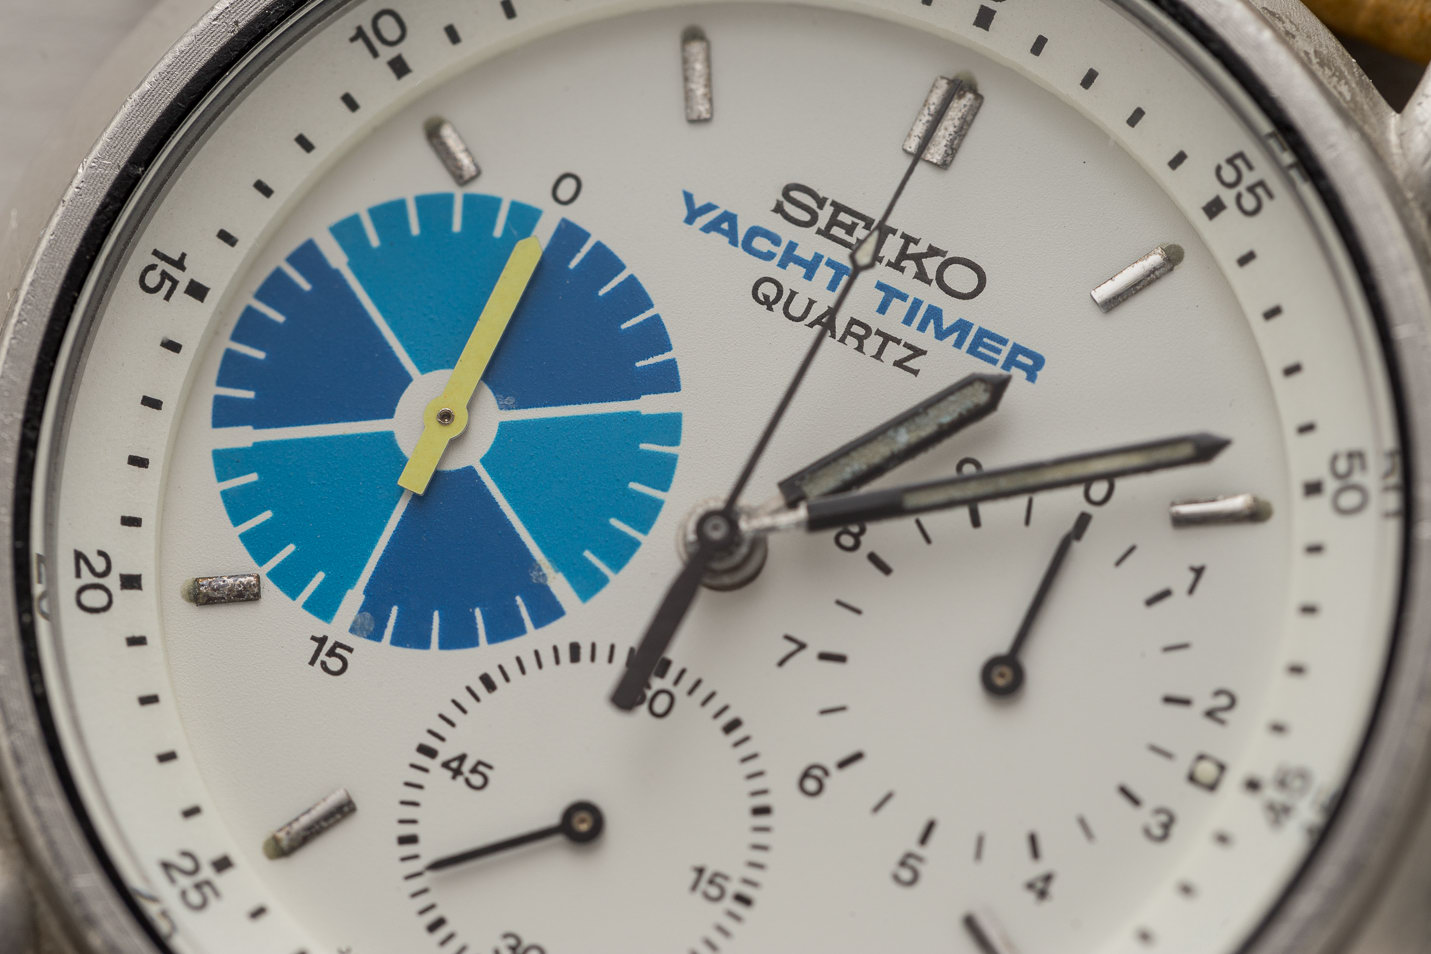 SEIKO Yacht Timer Vintage Chronograph - Shuck the Oyster Vintage Watches